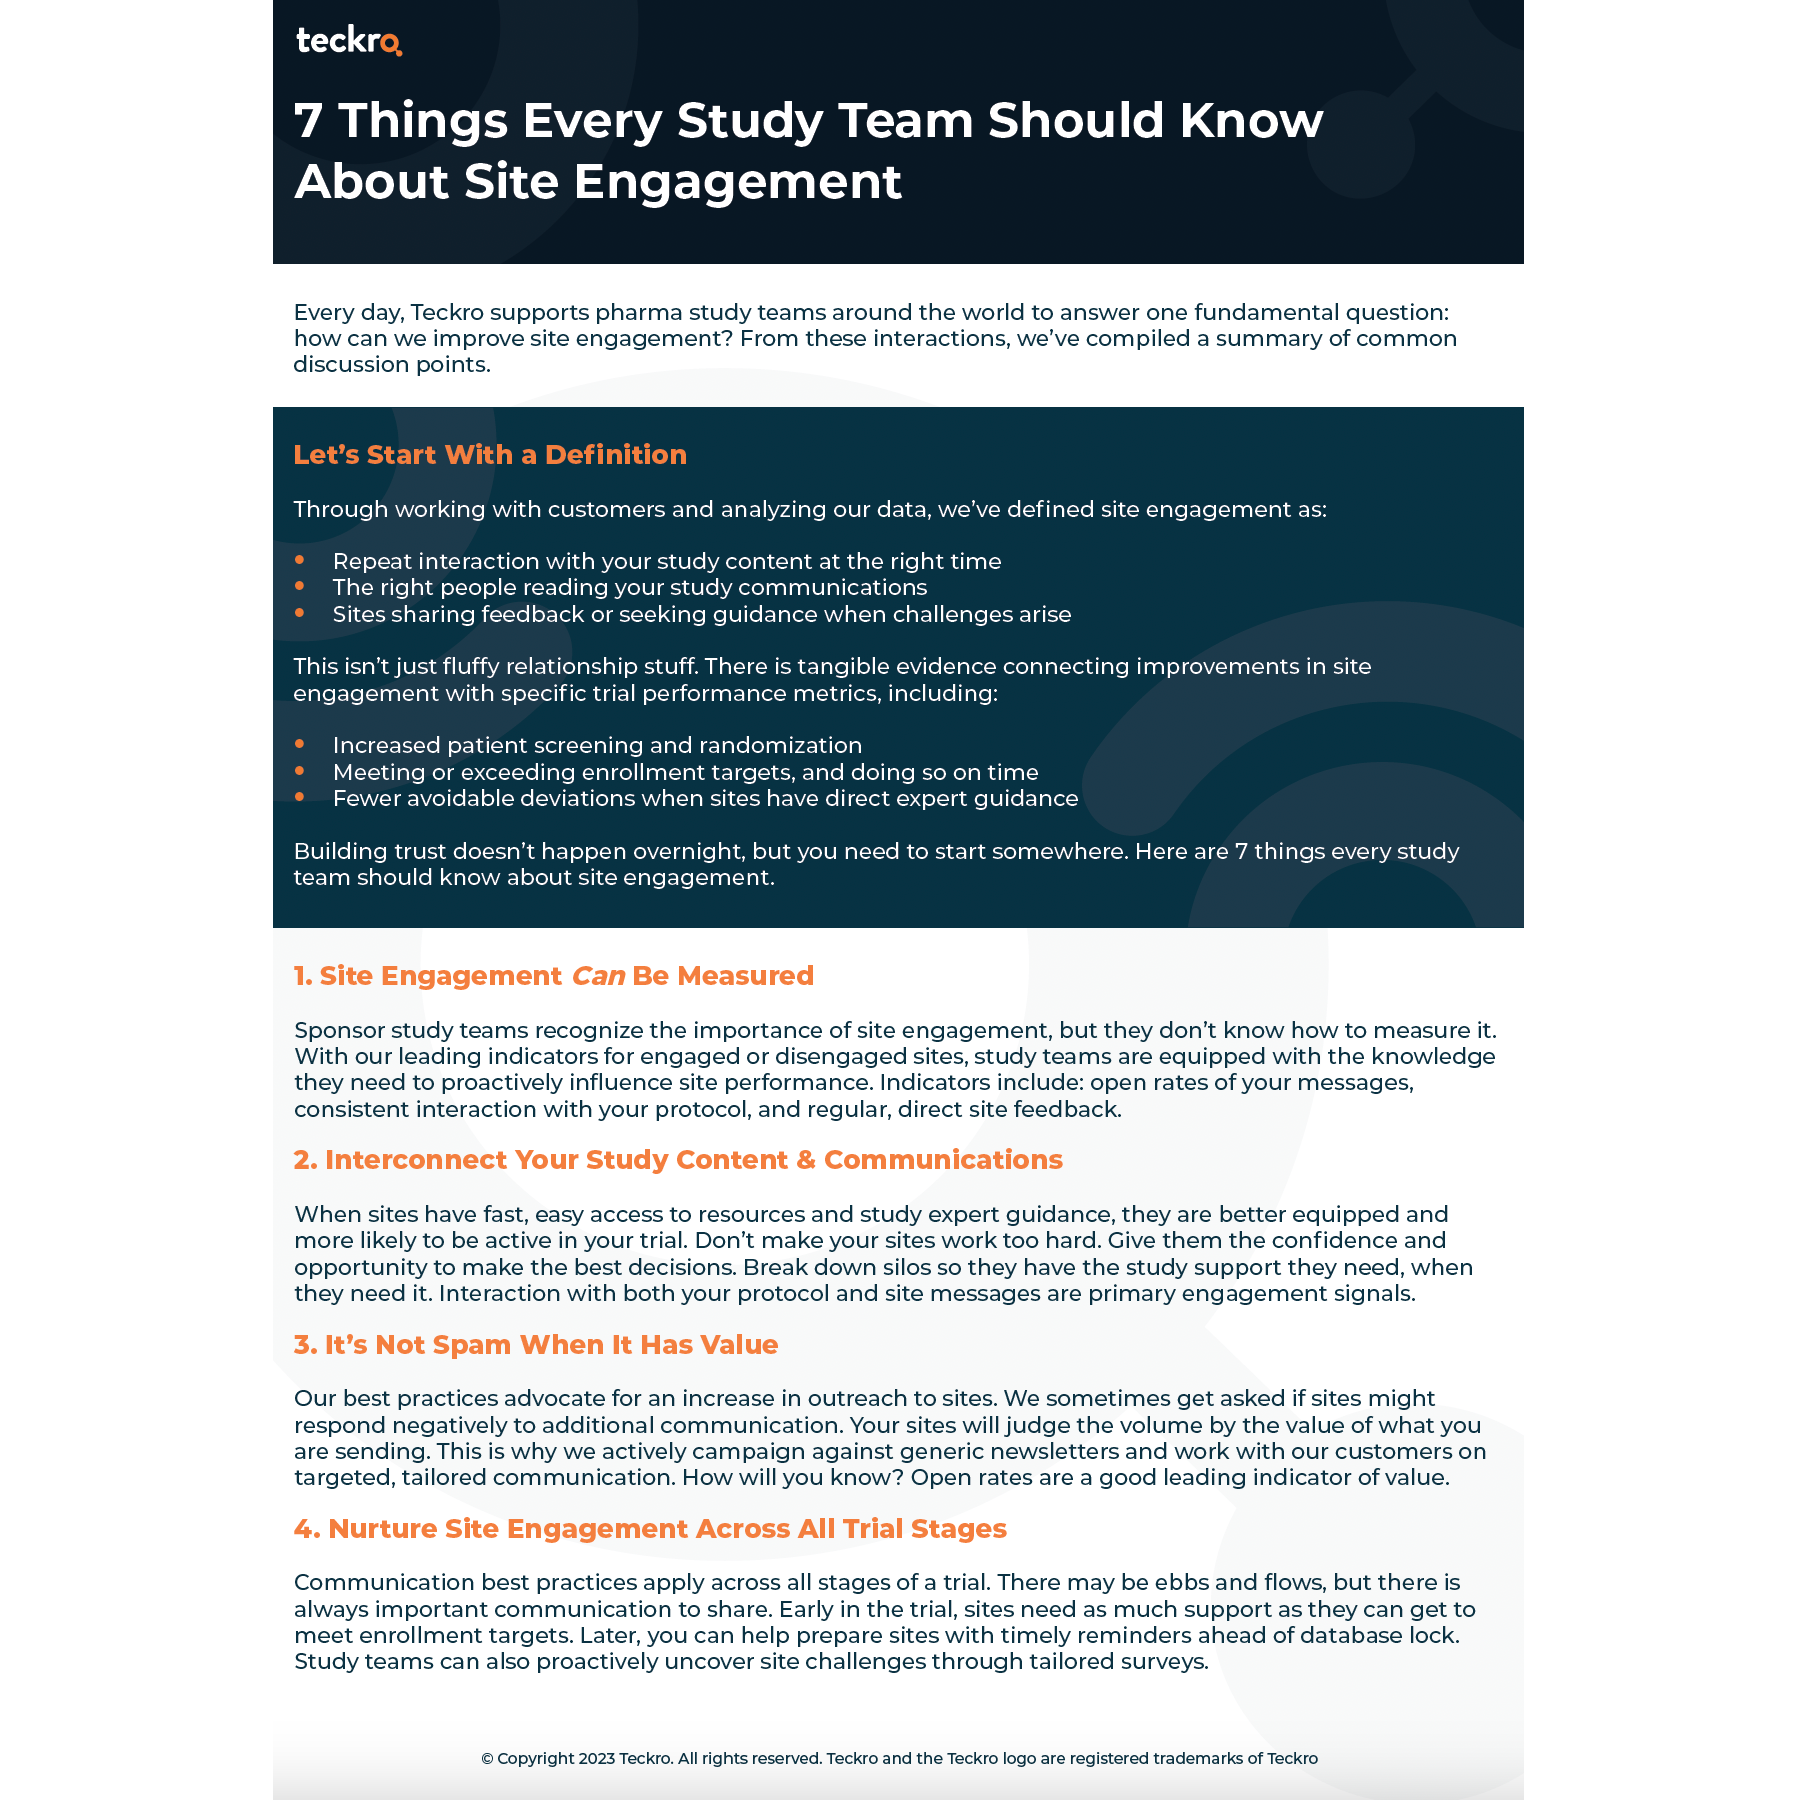 7-Things-Every-Study-Team-Should-Know-About-Site-Engagement.png